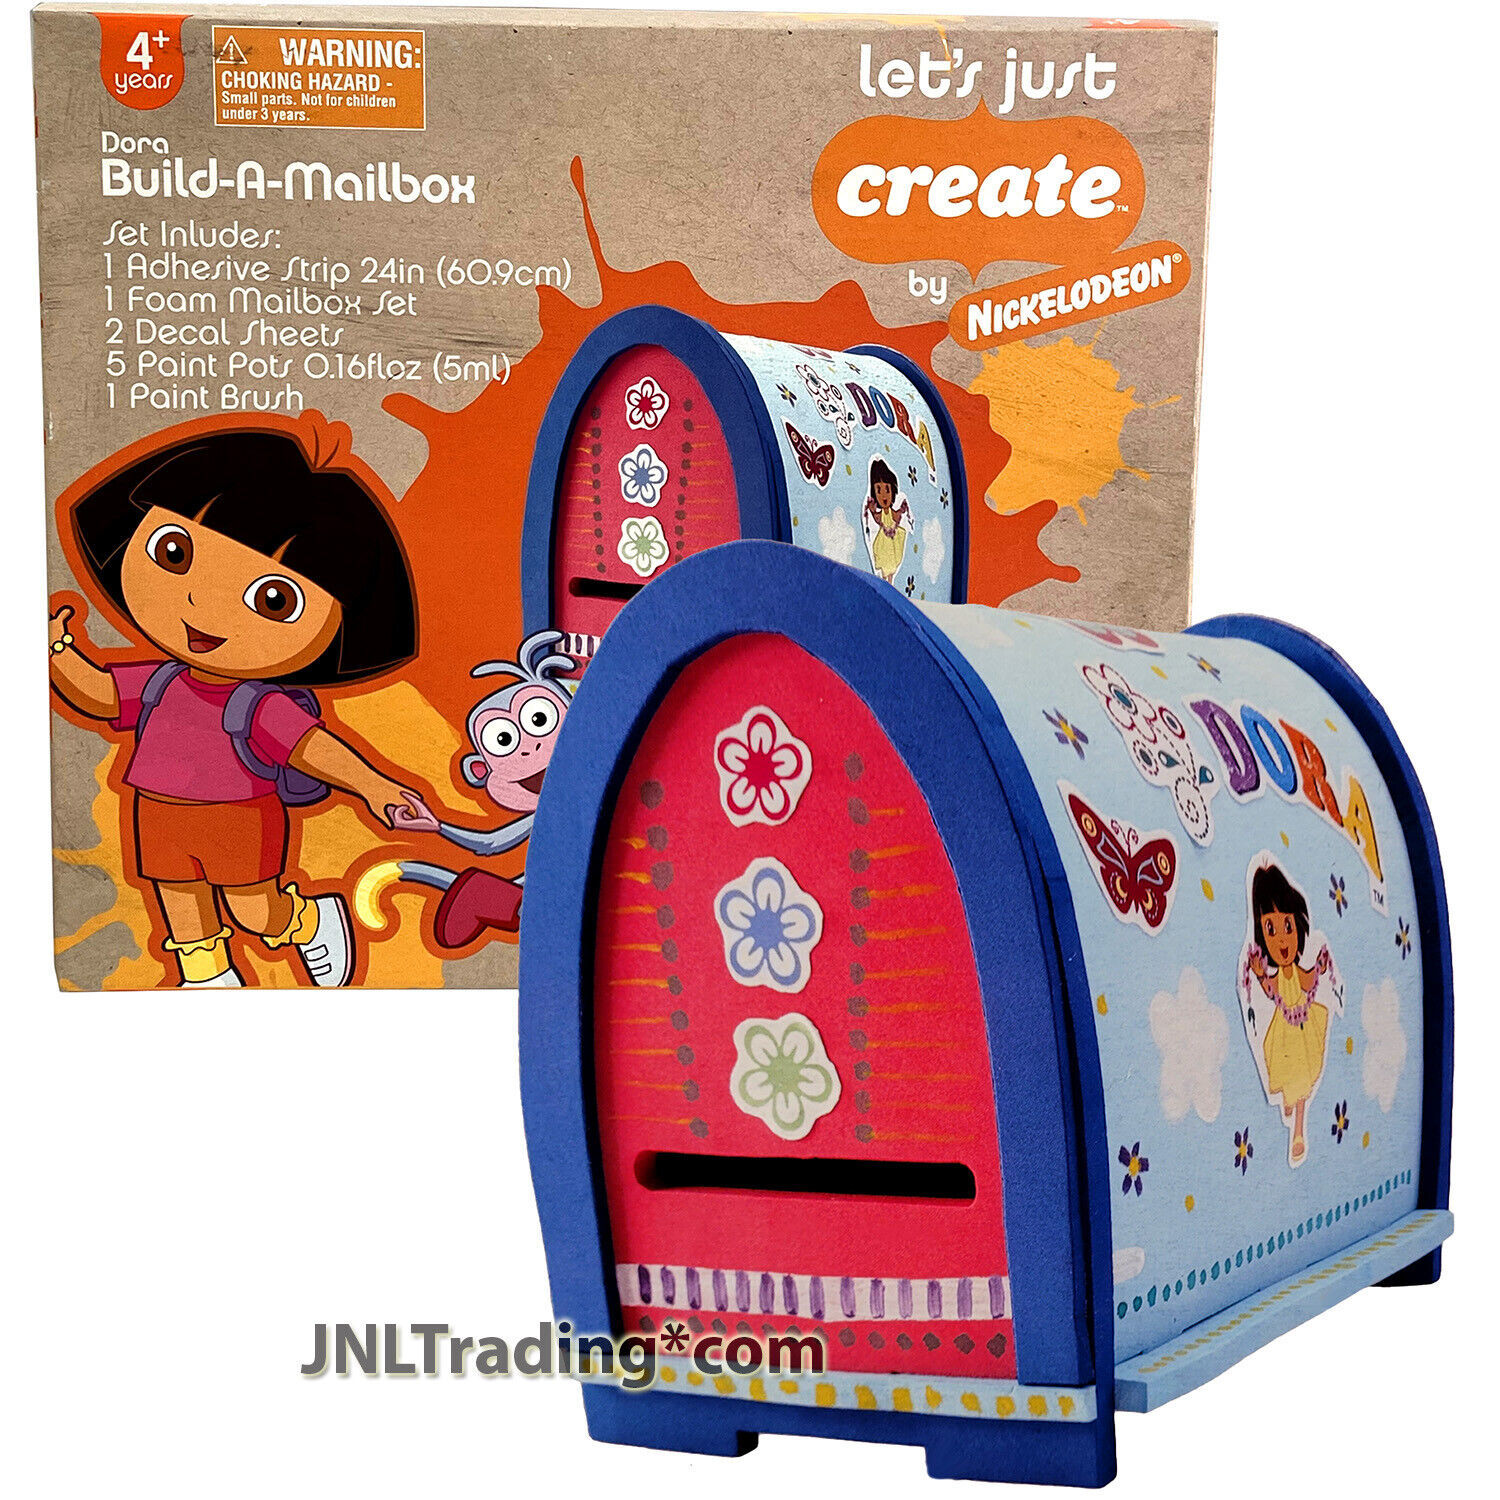 Primary image for Year 2007 Nickelodeon Dora the Explorer Let's Just Create Kit : BUILD -A-MAILBOX